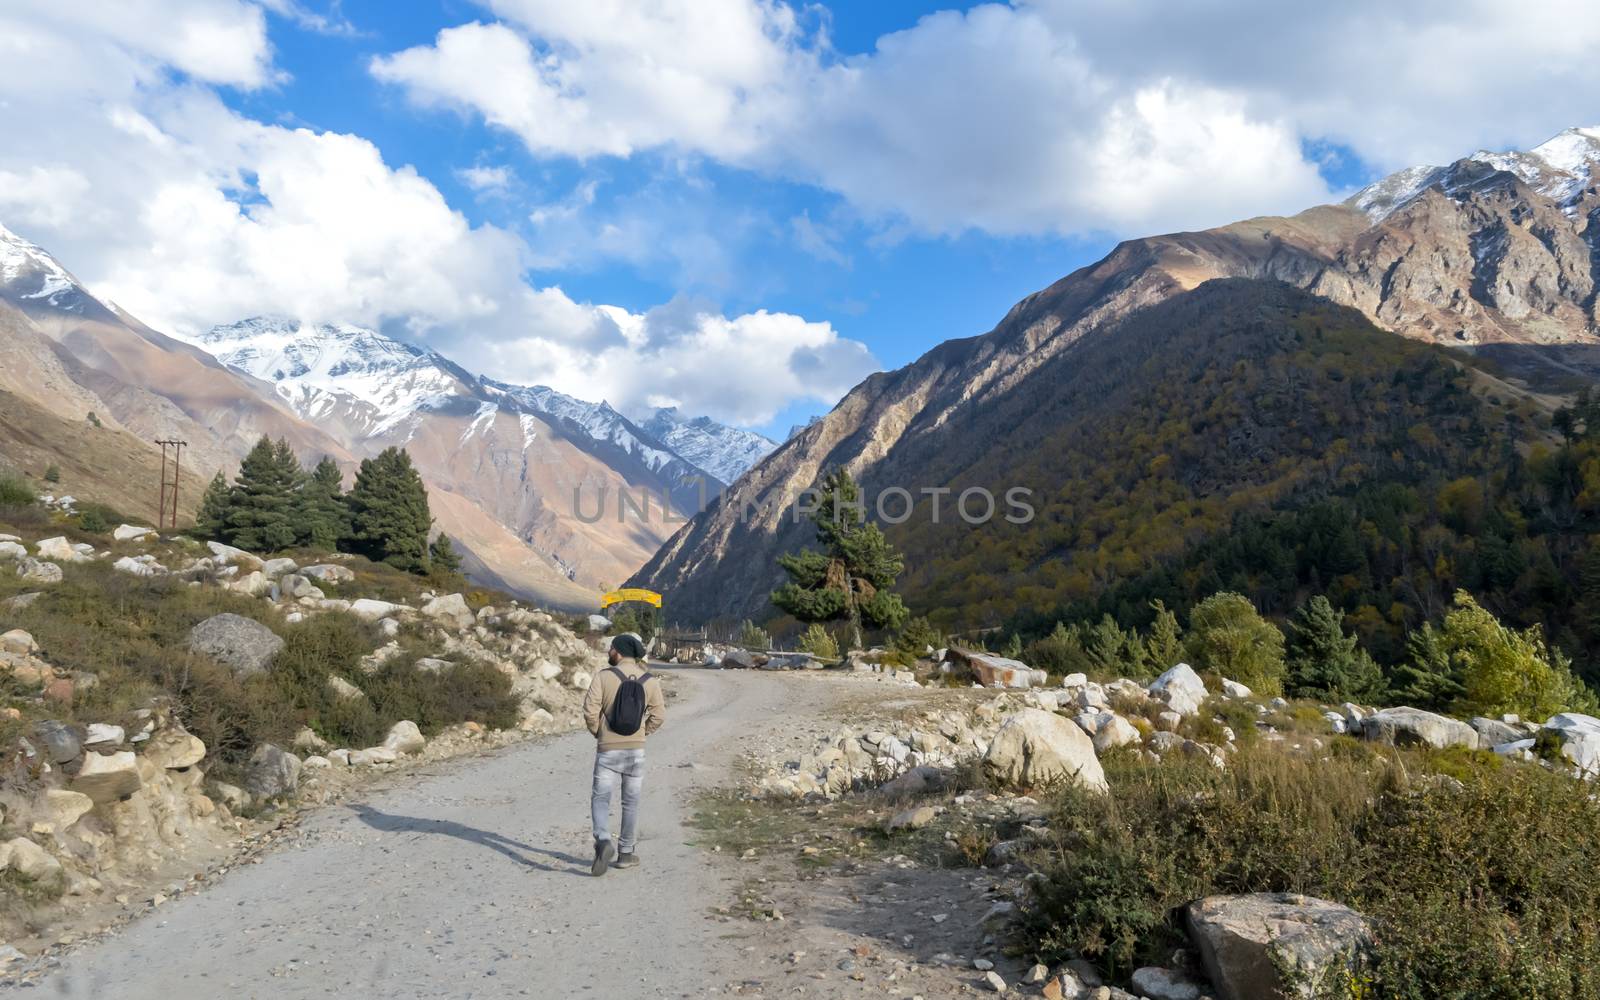 Rear View of Solo Indian traveler in winter clothing walking alone hiking a remote mountain road. Snow capped Himalayan mountain with floating clouds and blue sky in background. Spiti Valley Himachal Pradesh India South Asia Pac